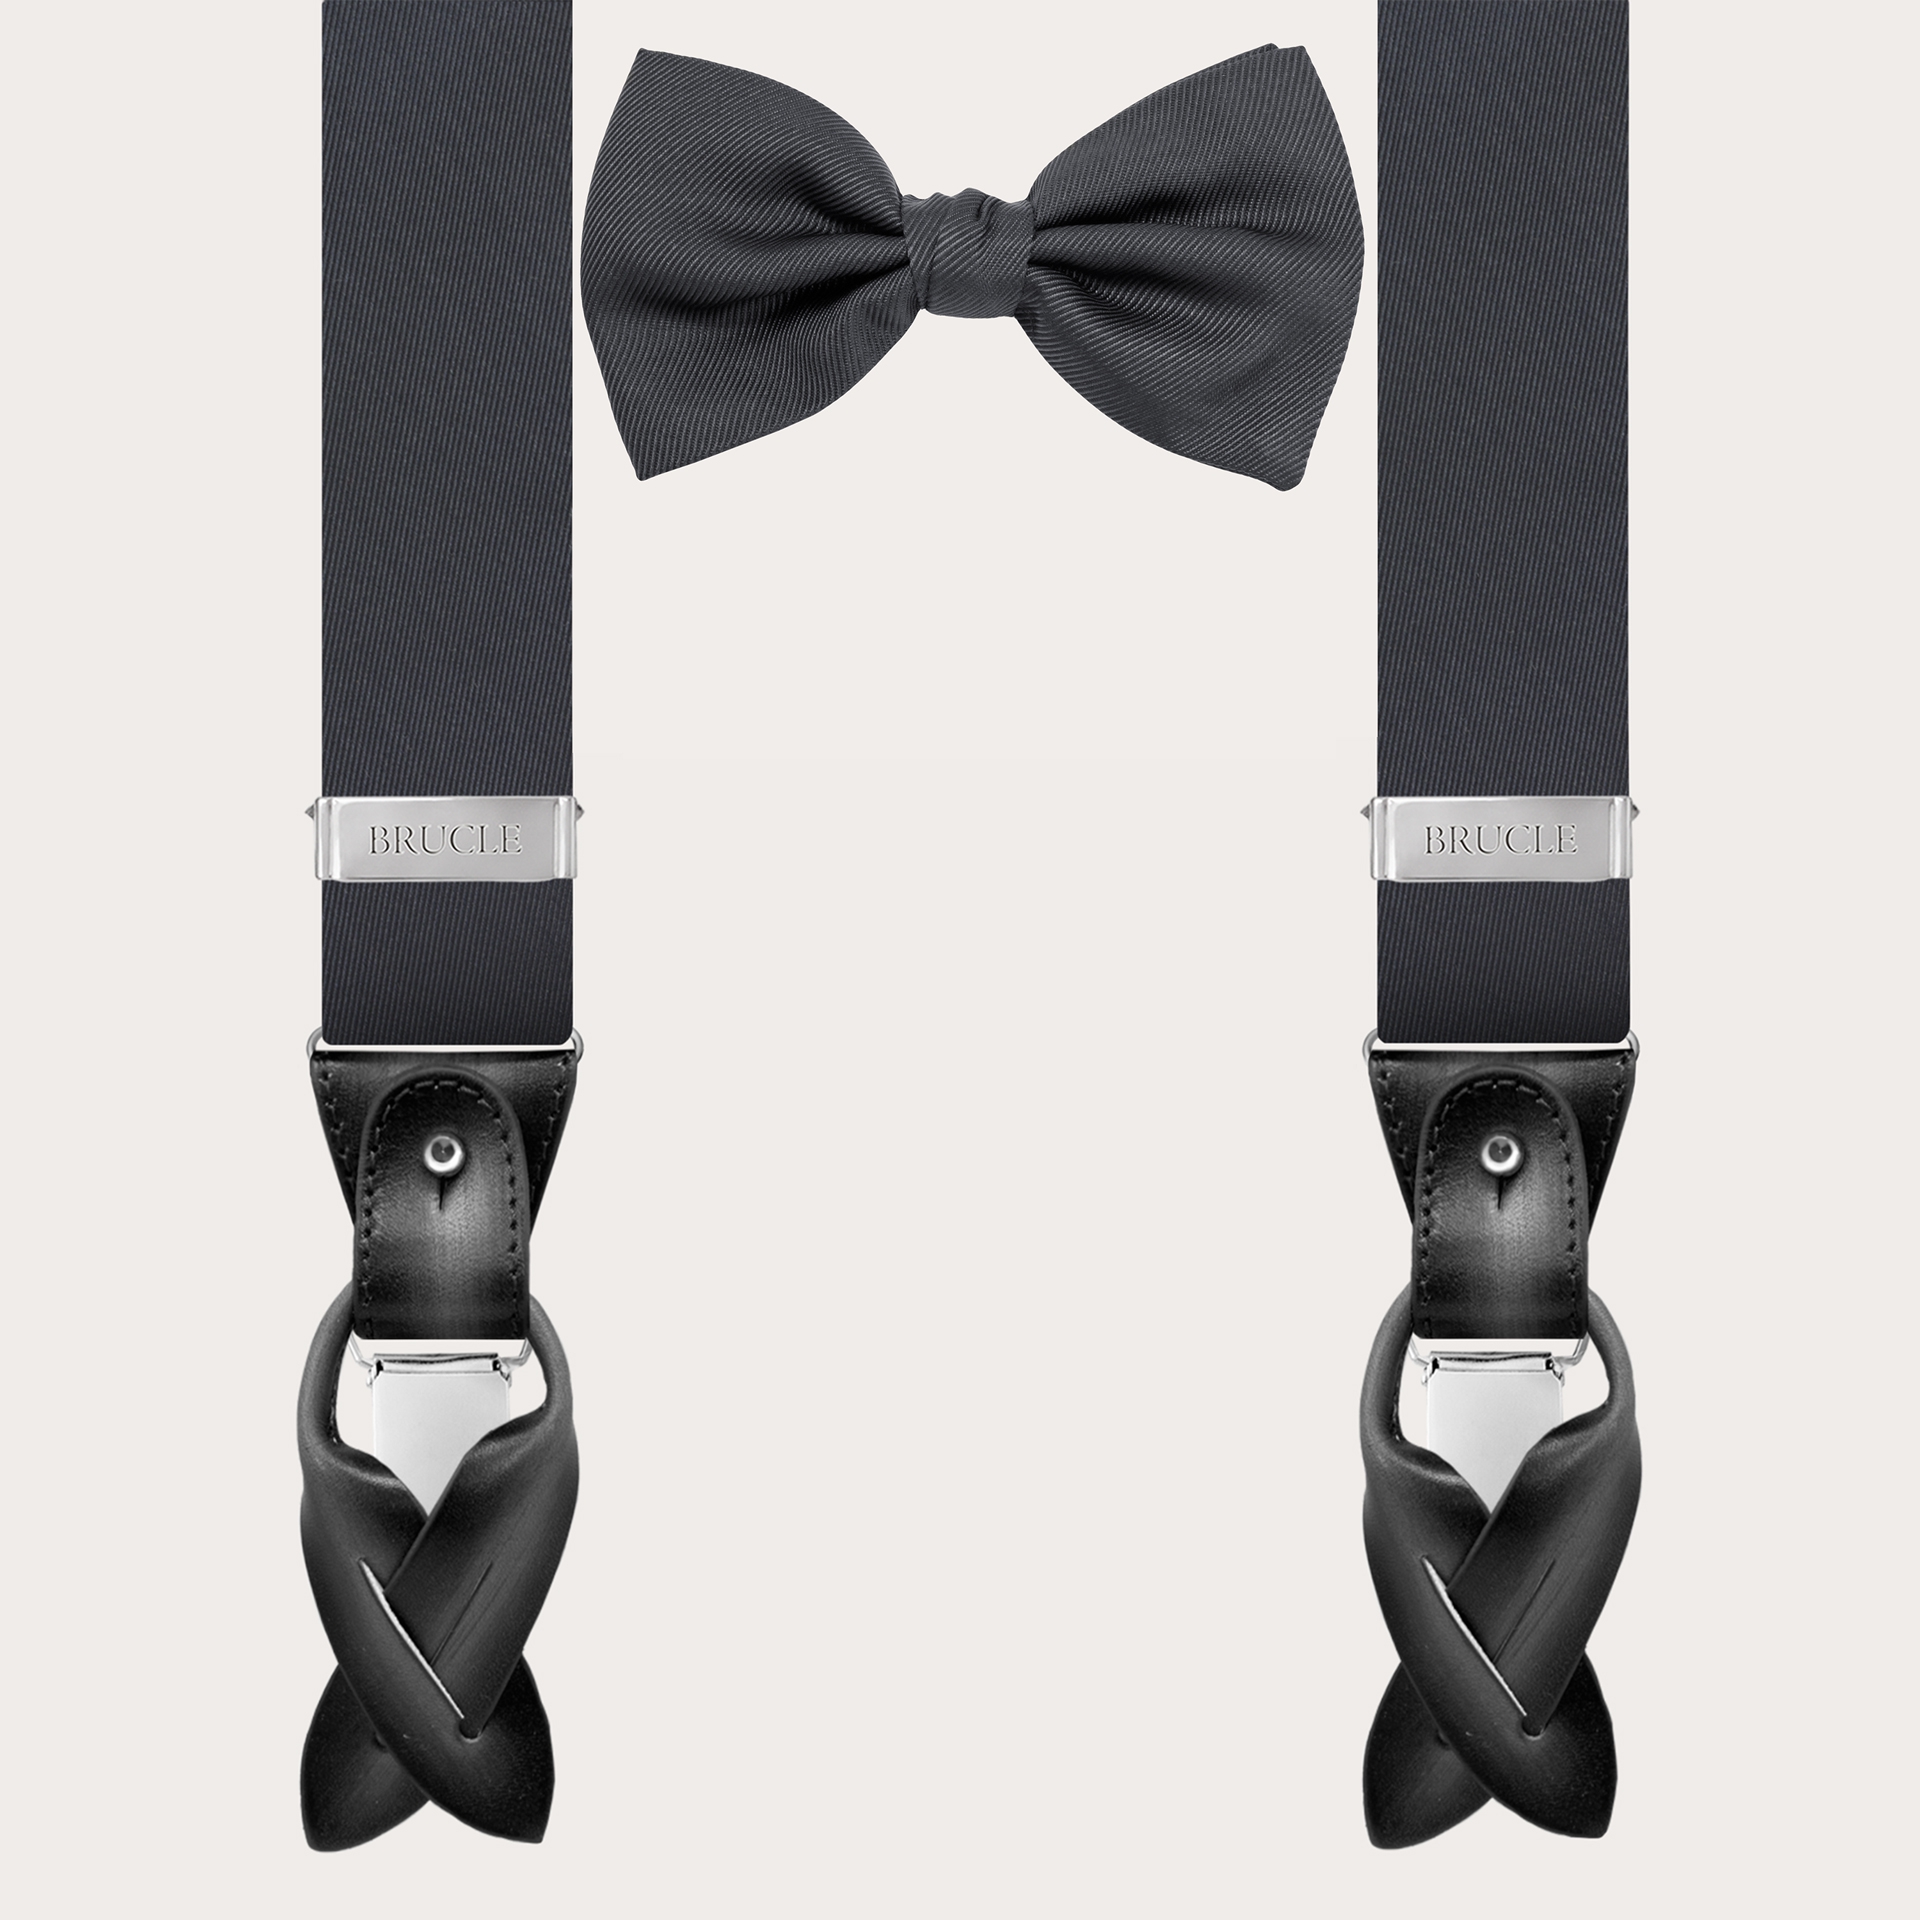 BRUCLE Suspenders and bow tie set in charcoal grey silk